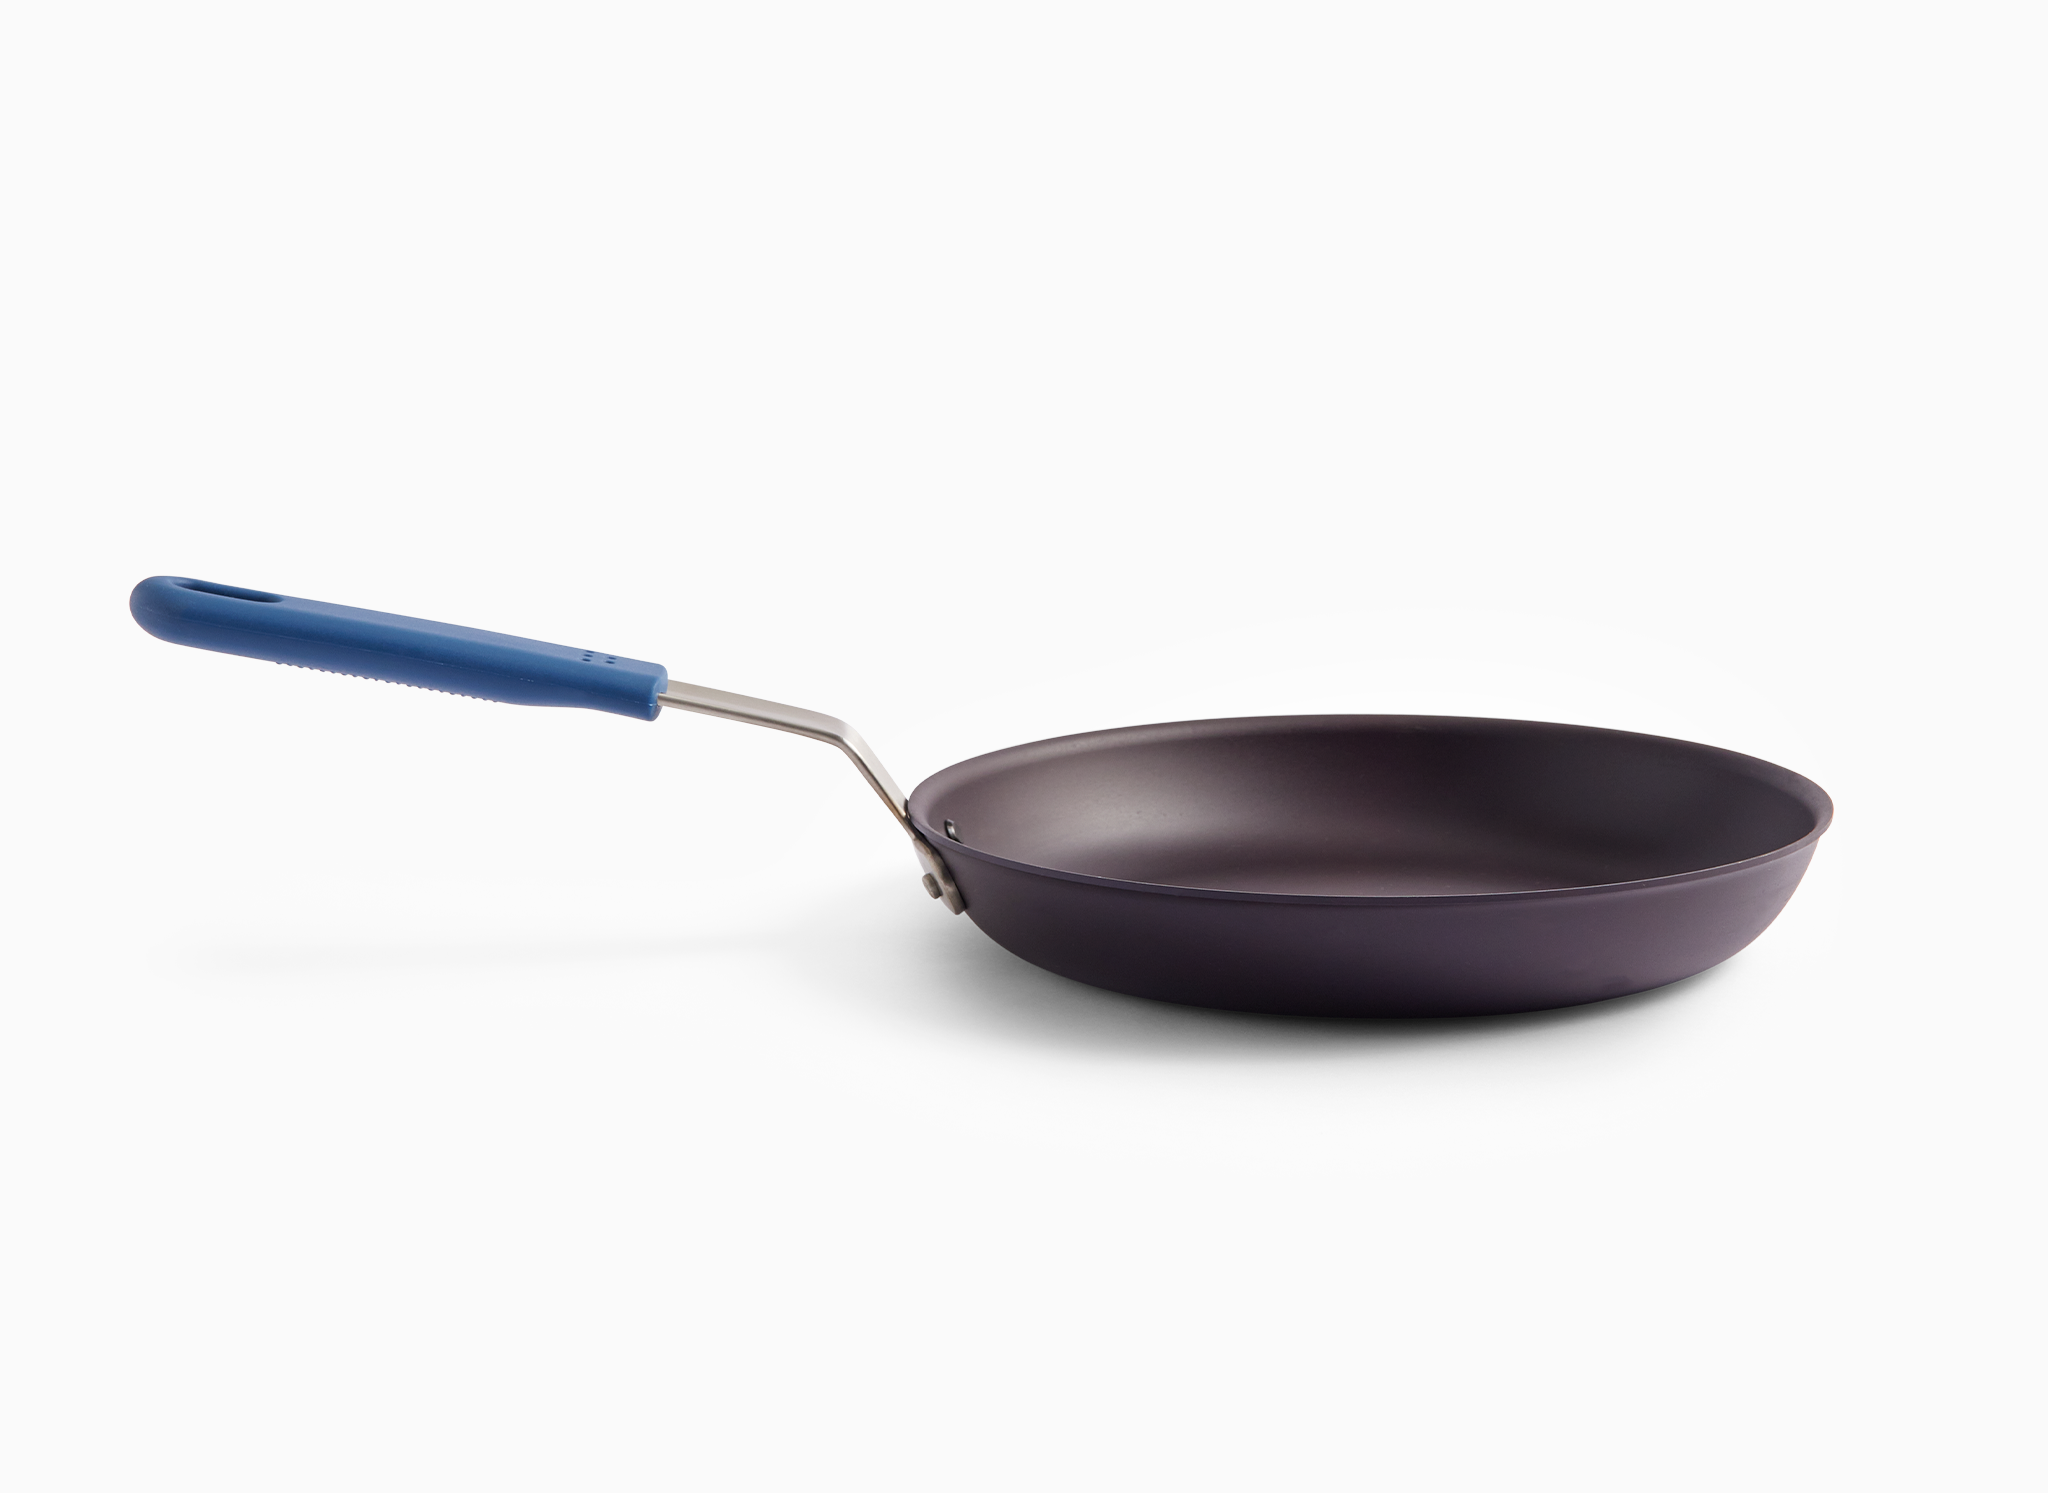 non-stick surfaces and seasoning